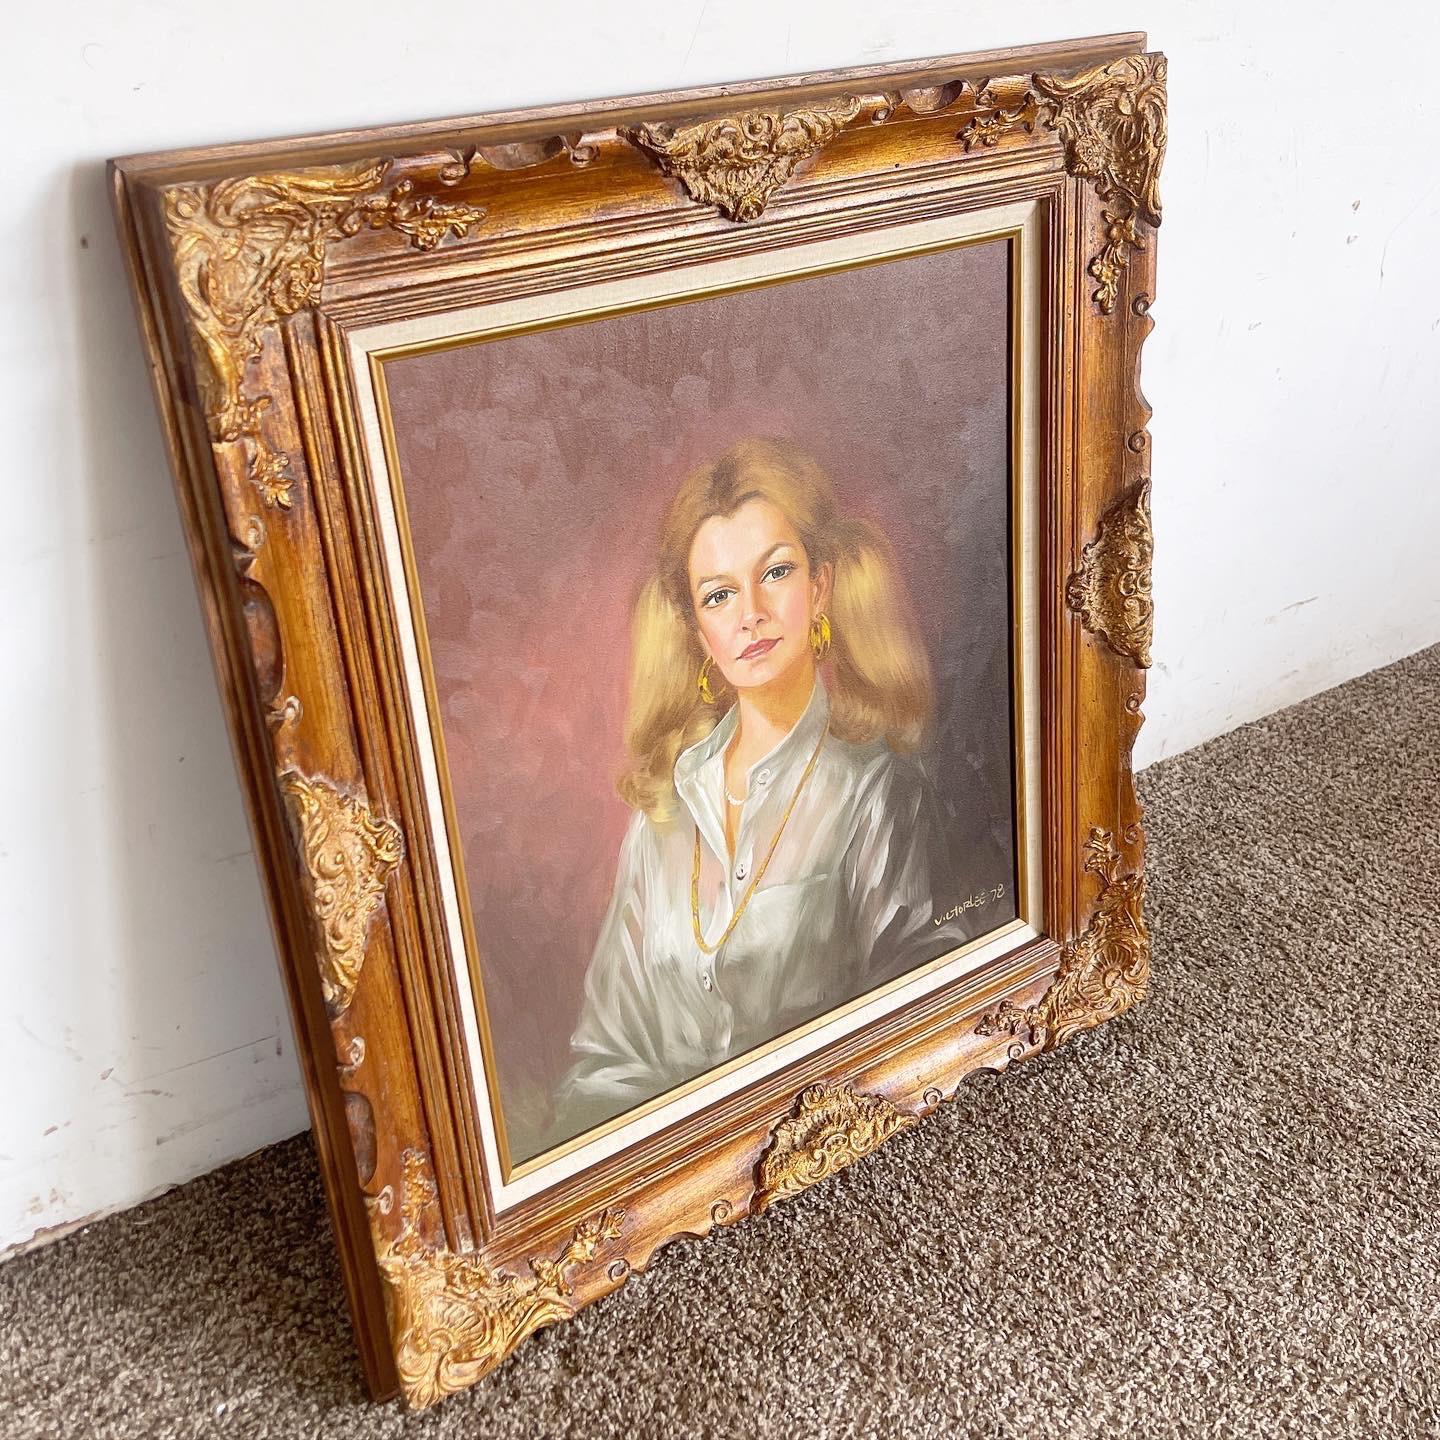 Delve into an era of elegance with the Mid Century Hand Painted Portrait of Lady 1978, a timeless representation of feminine strength and style.

Captures a poised and confident lady, symbolizing feminine strength.
Features elegantly styled blonde